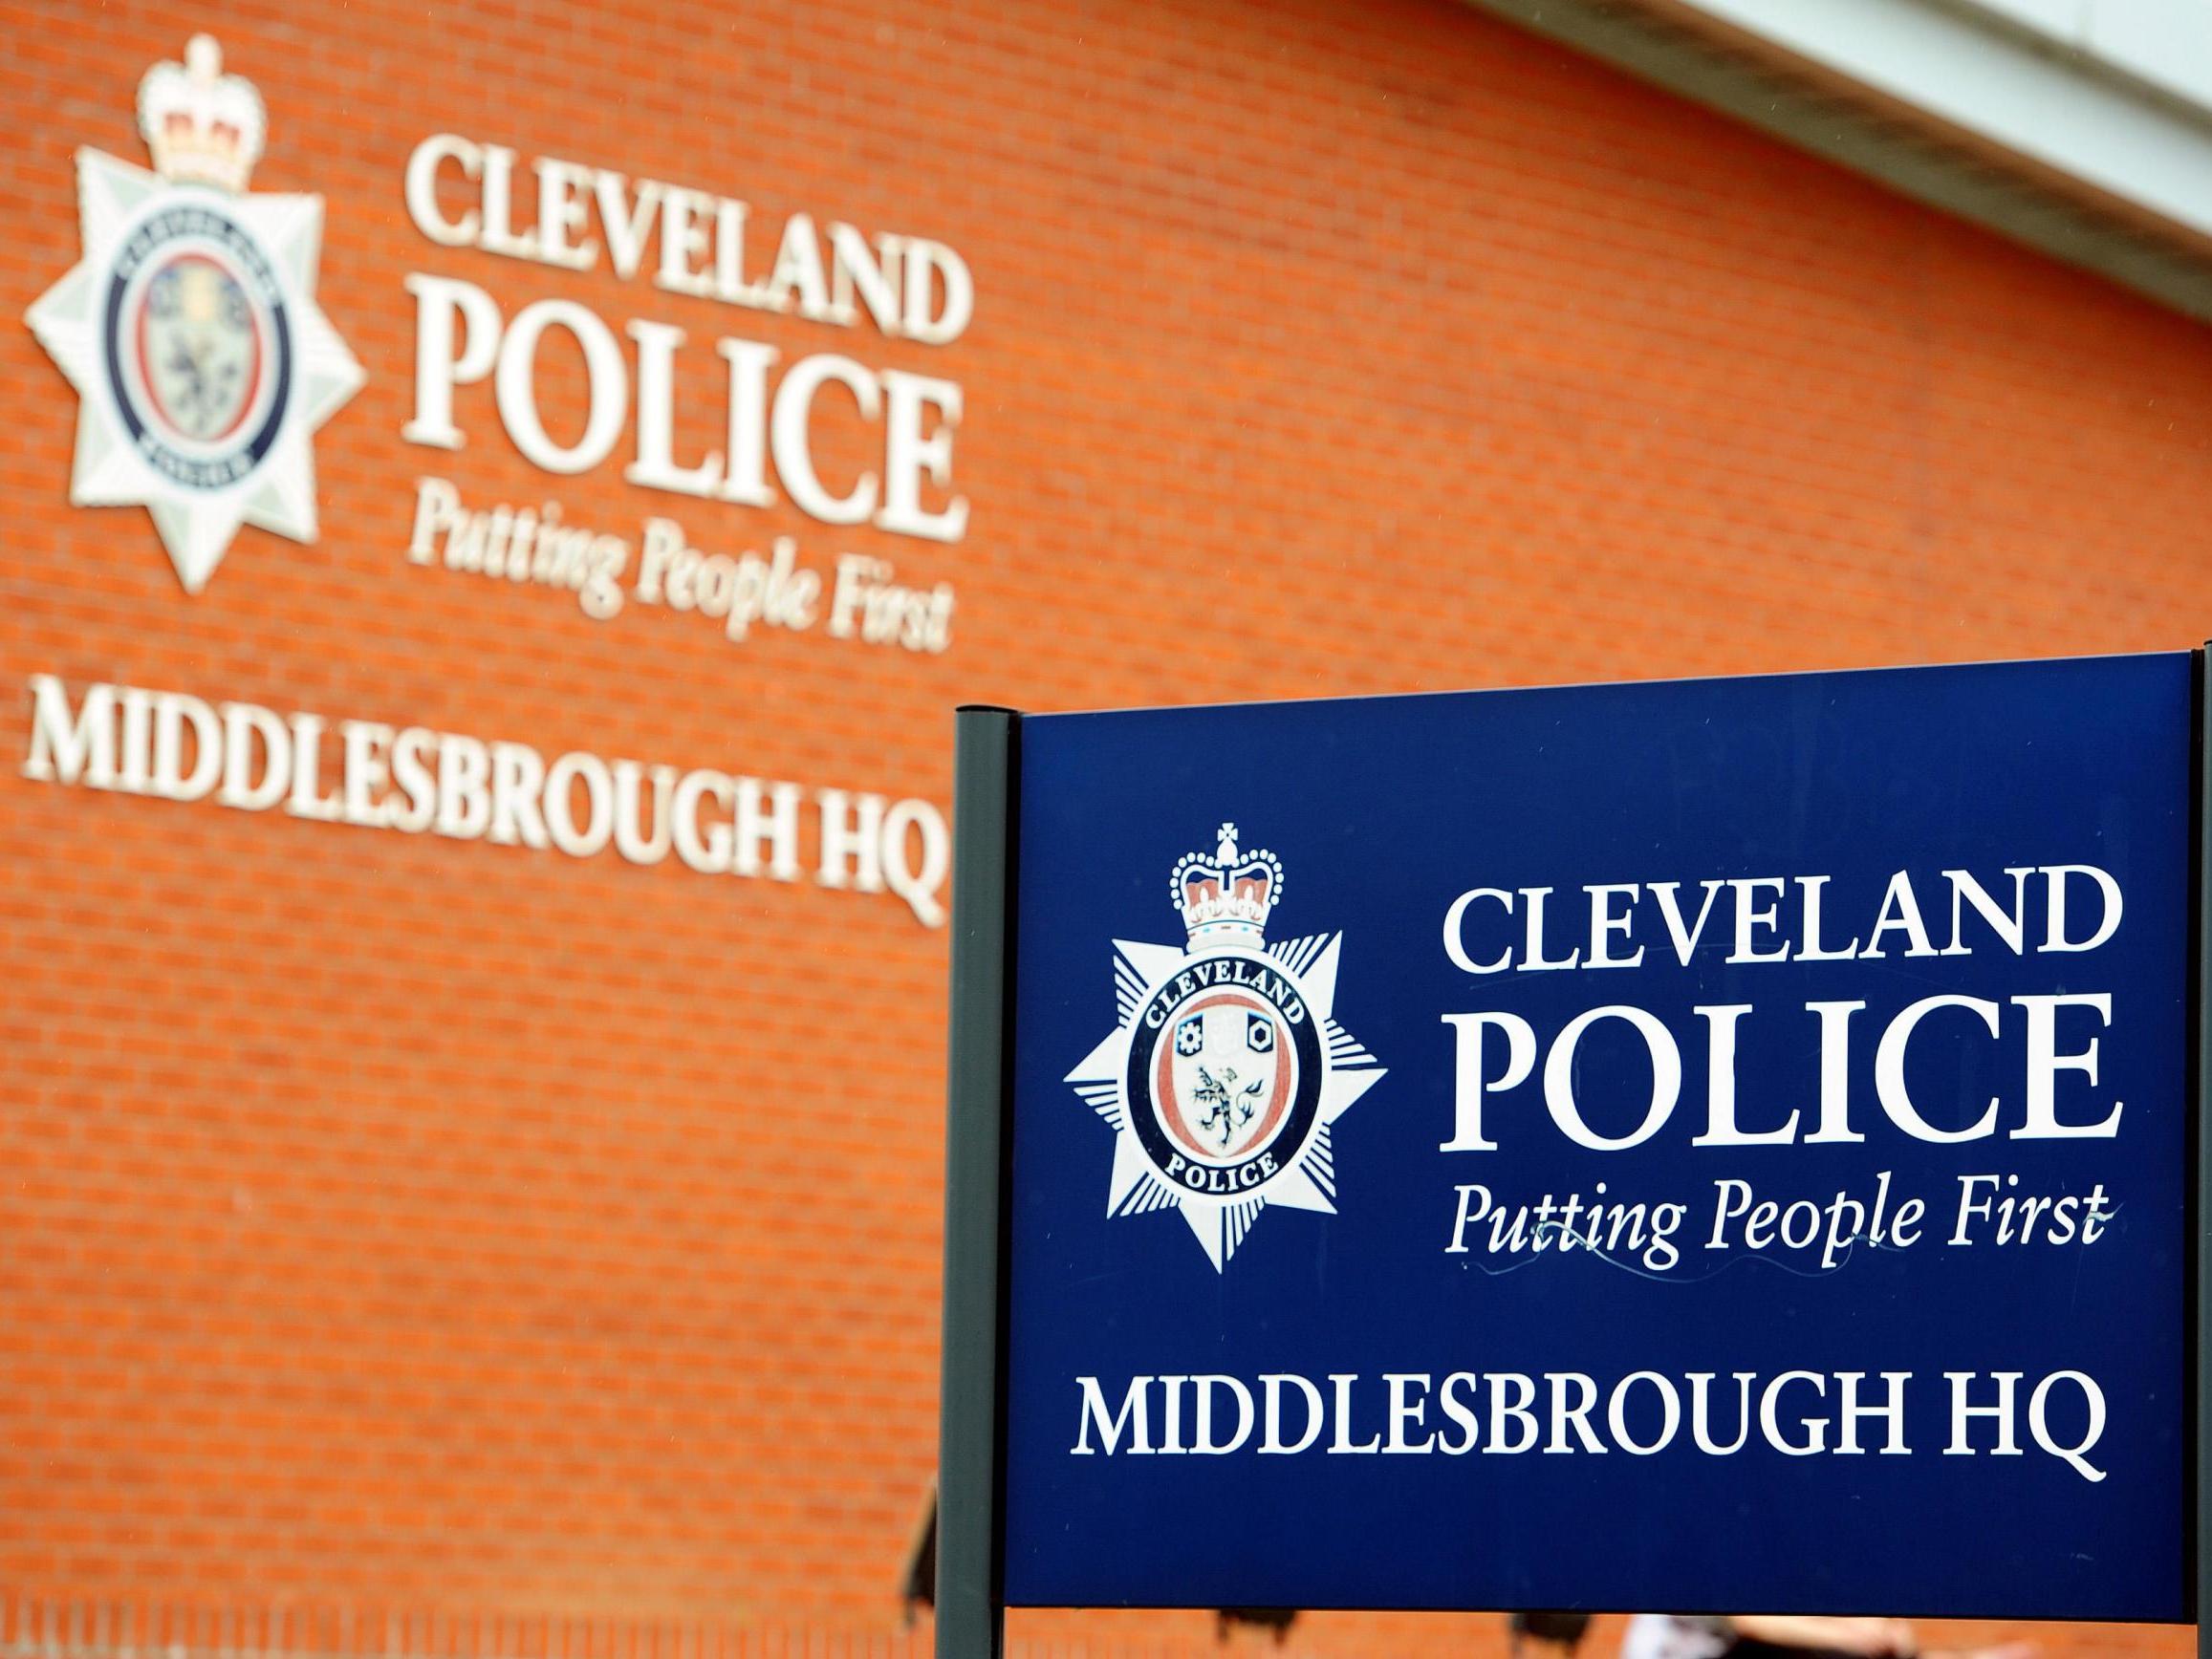 Headquarters of Cleveland Police, the force David Waller worked for between 2006 and 2010